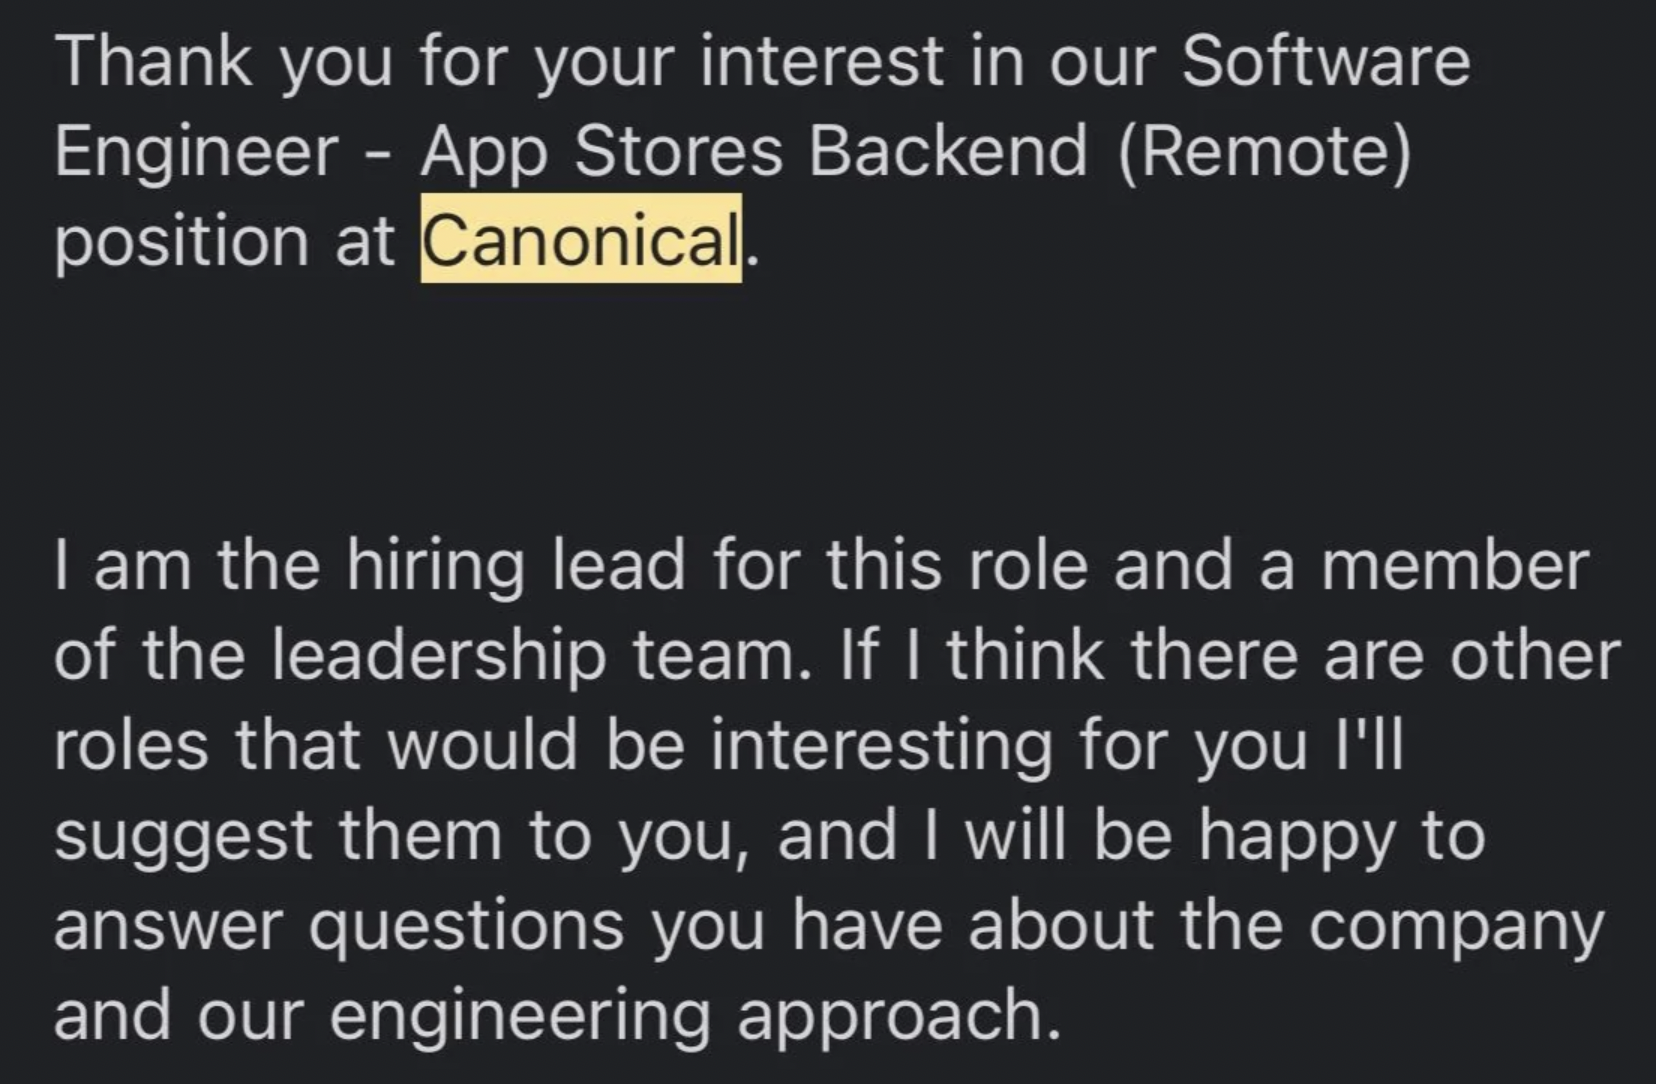 number - Thank you for your interest in our Software Engineer App Stores Backend Remote position at Canonical. I am the hiring lead for this role and a member of the leadership team. If I think there are other roles that would be interesting for you I'll 